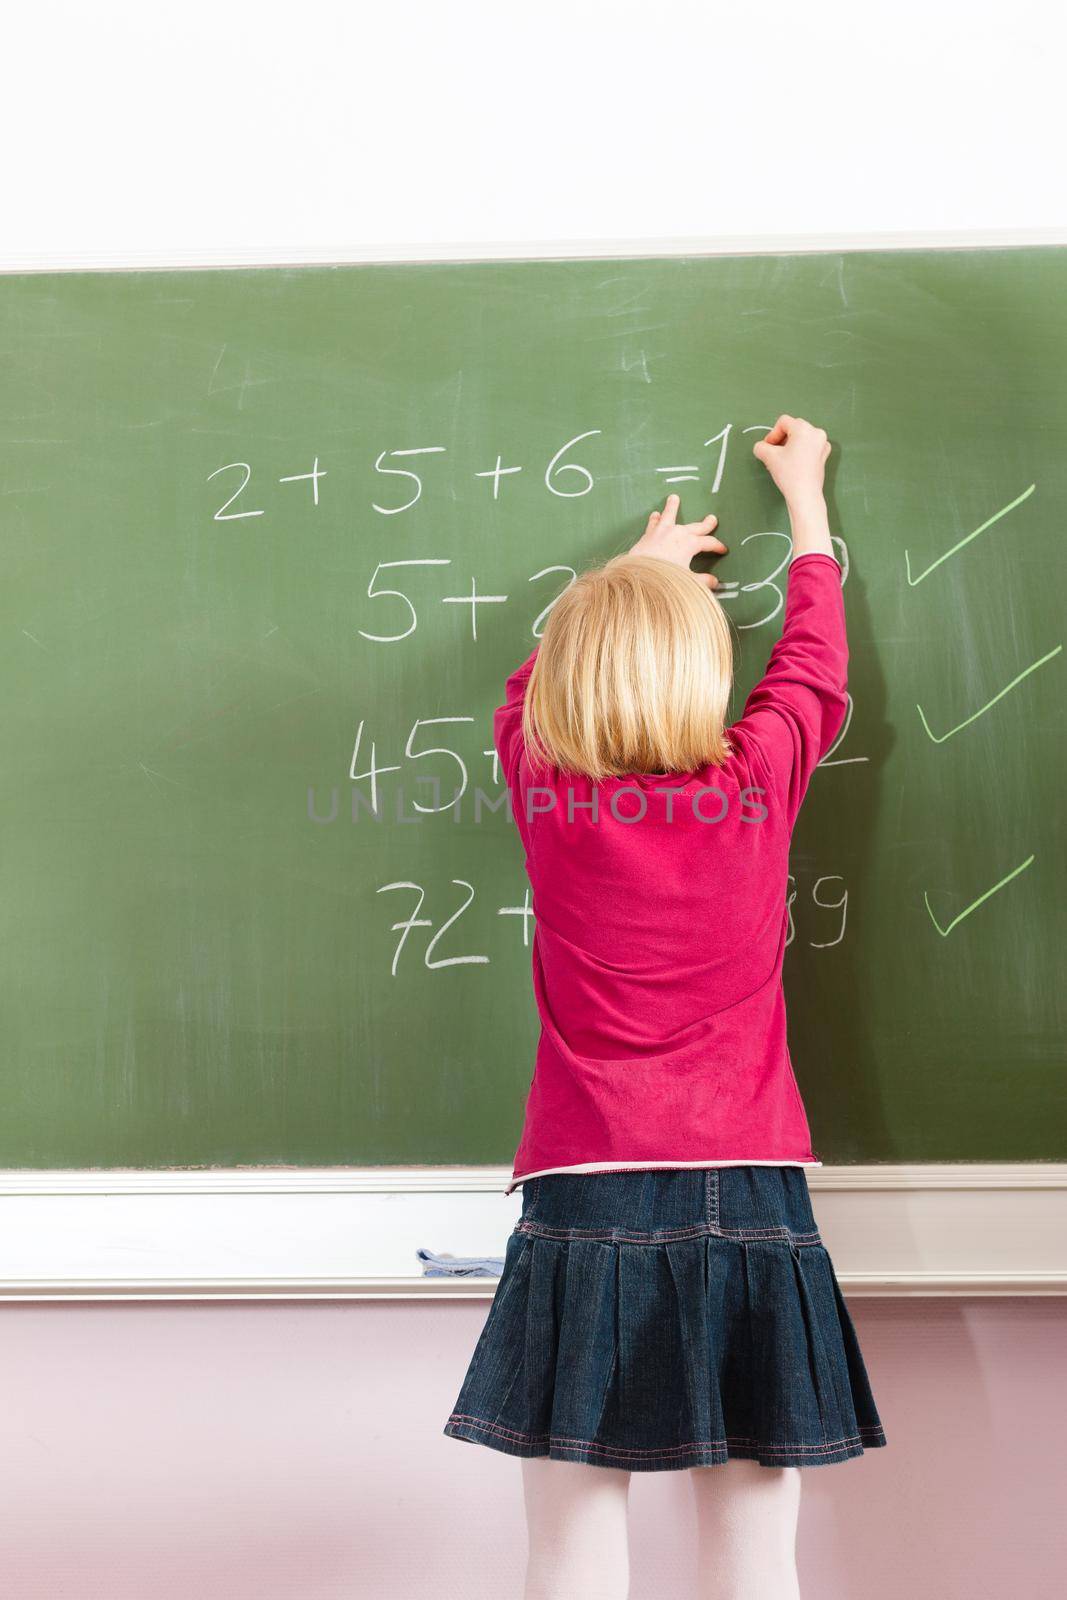 Education - Child or pupil at blackboard in school in maths